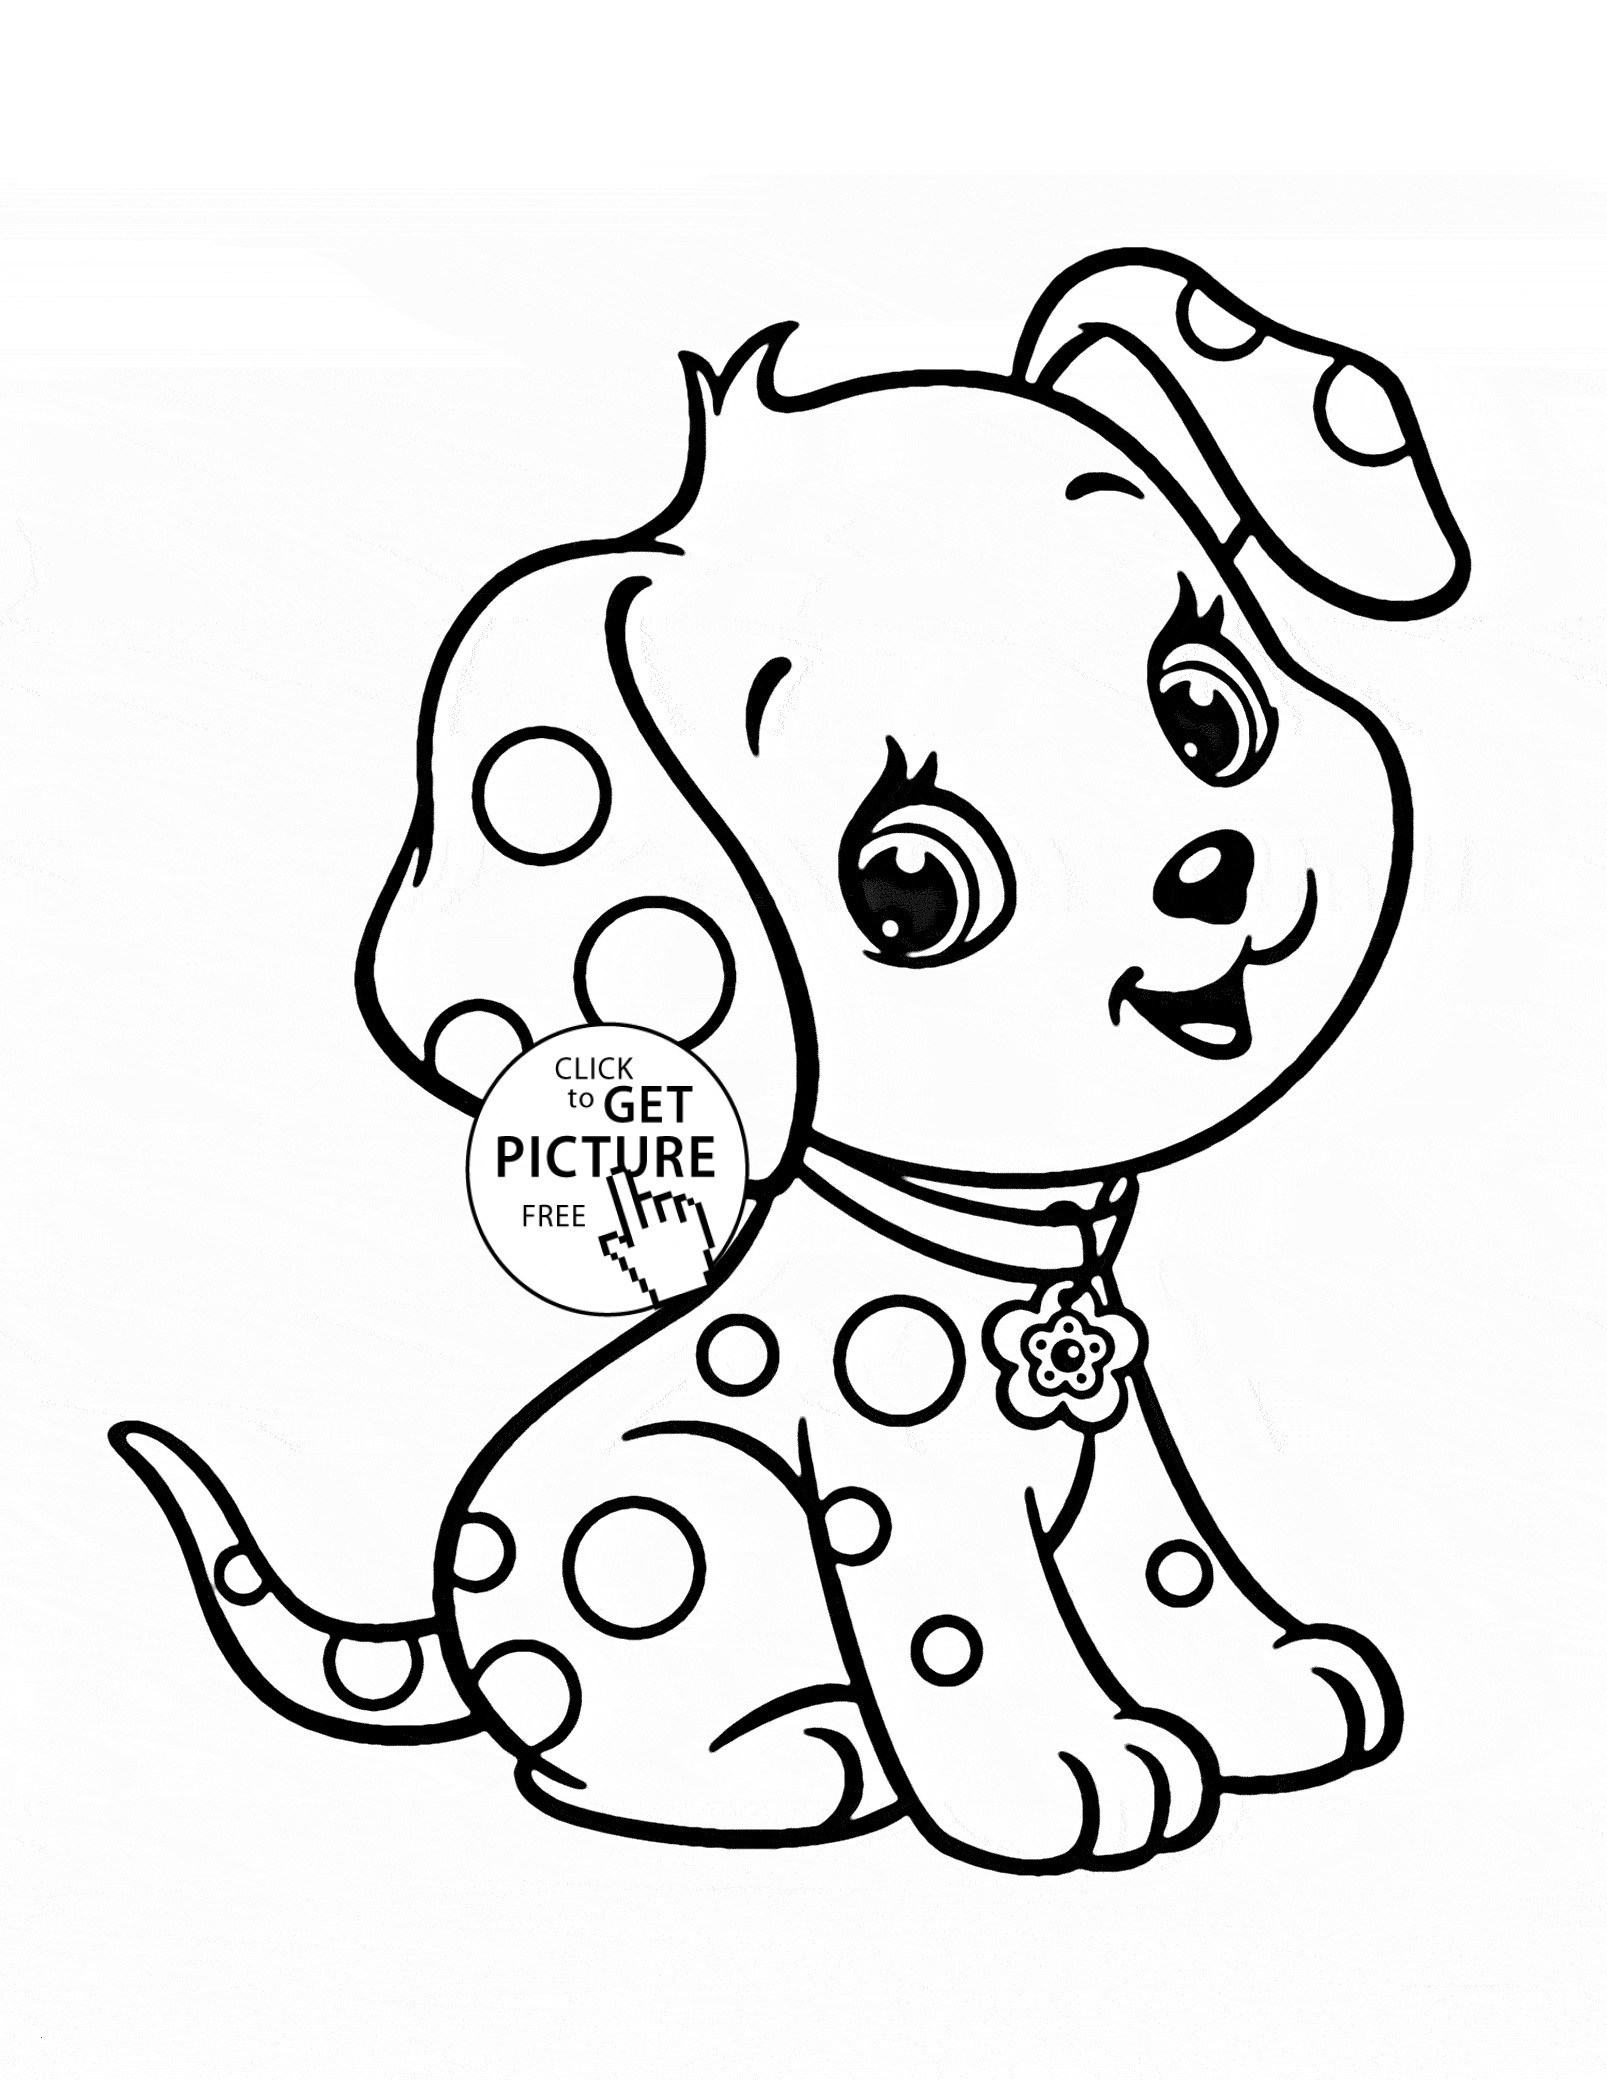 Cute Baby Animal Coloring Pages Inspirational Baby Animal Coloring Pages Beautiful Cartoon Puppy Coloring Page for